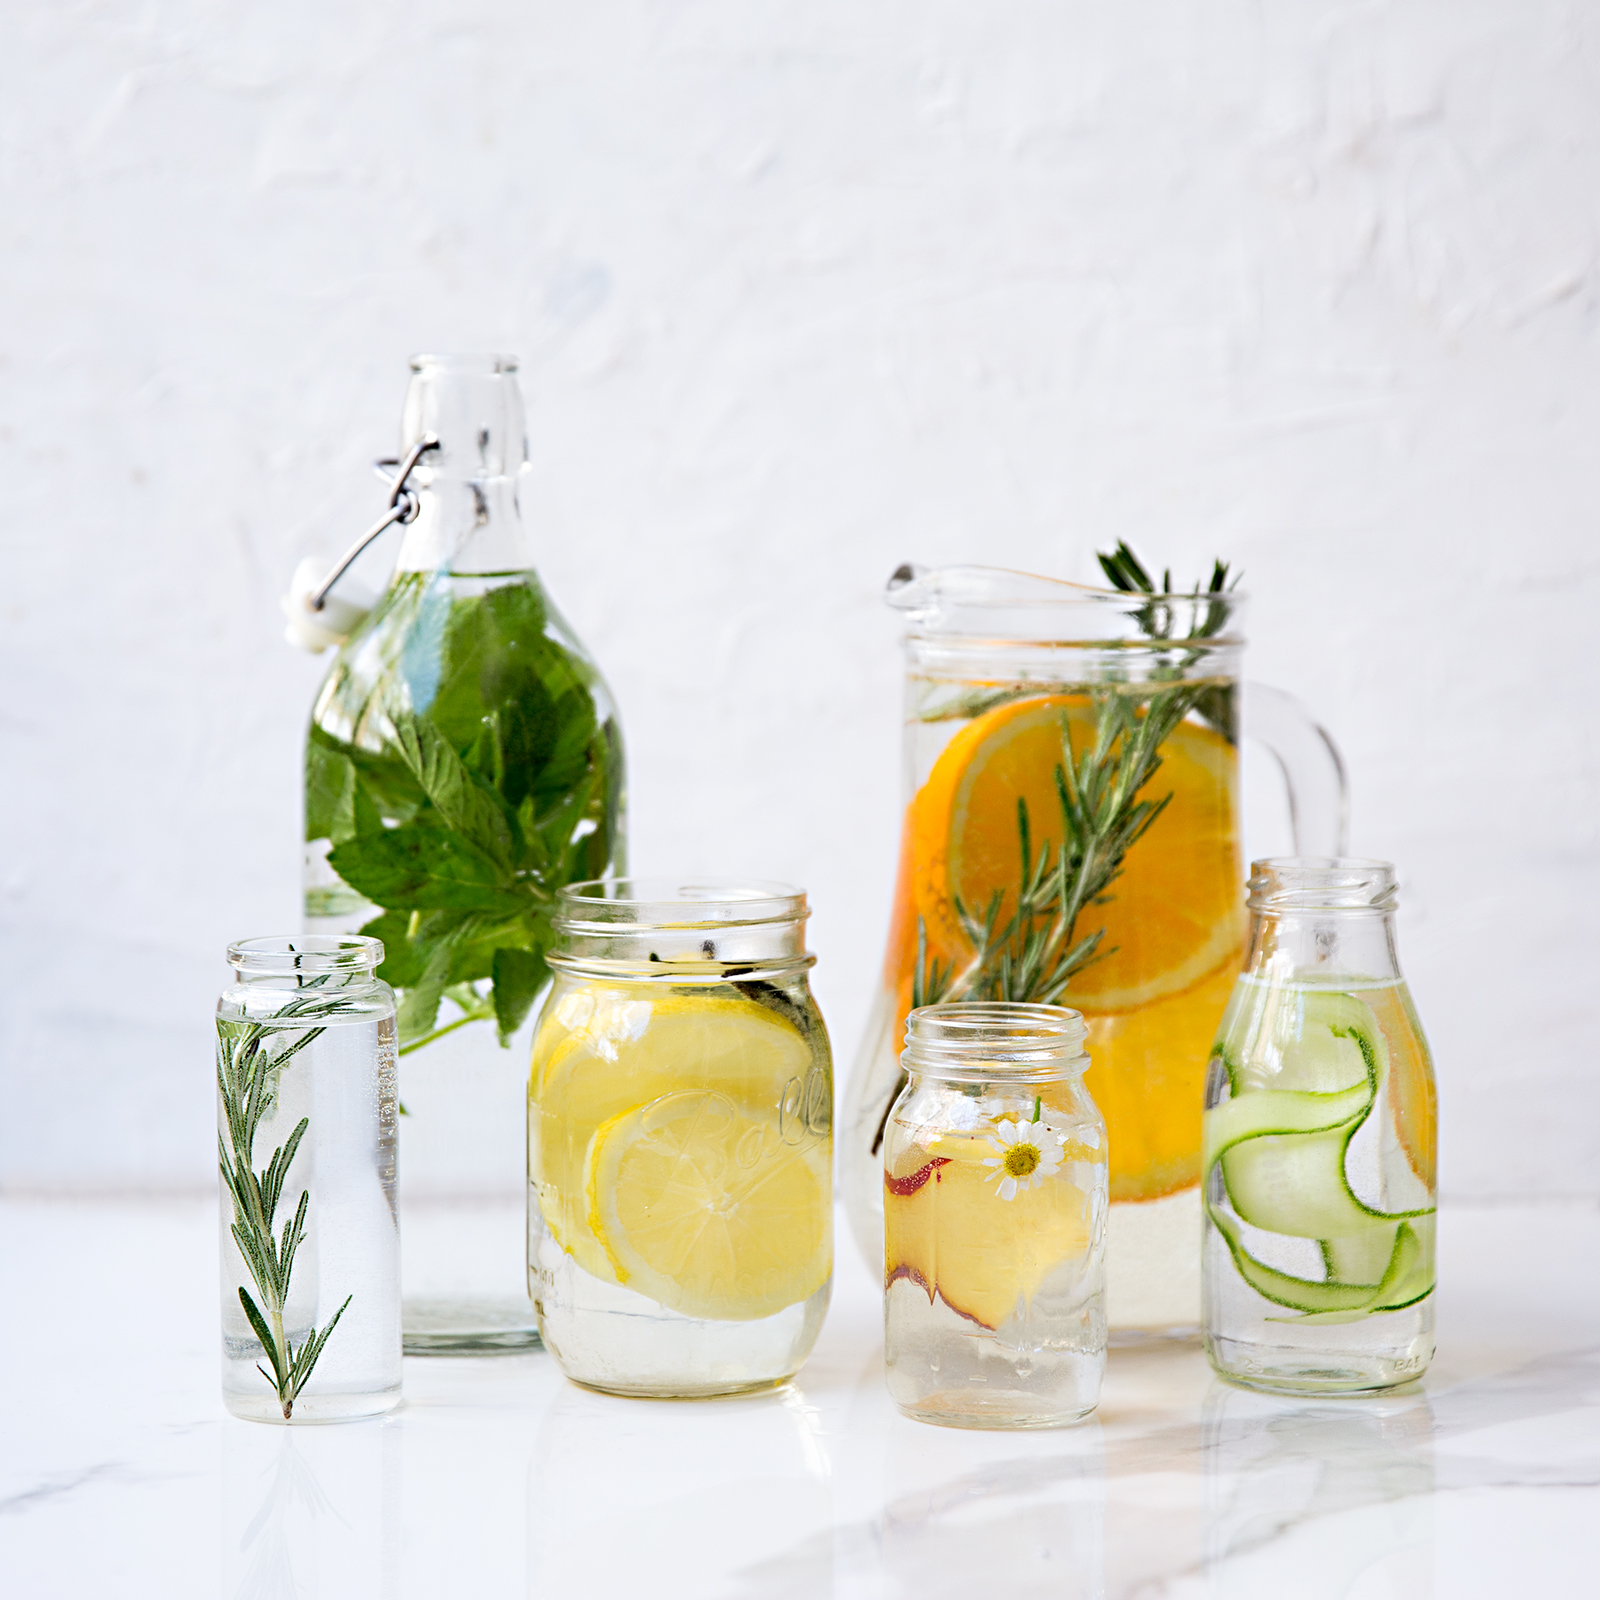 jugs and jars filled with water and aloe drink infused with fruit and herbs